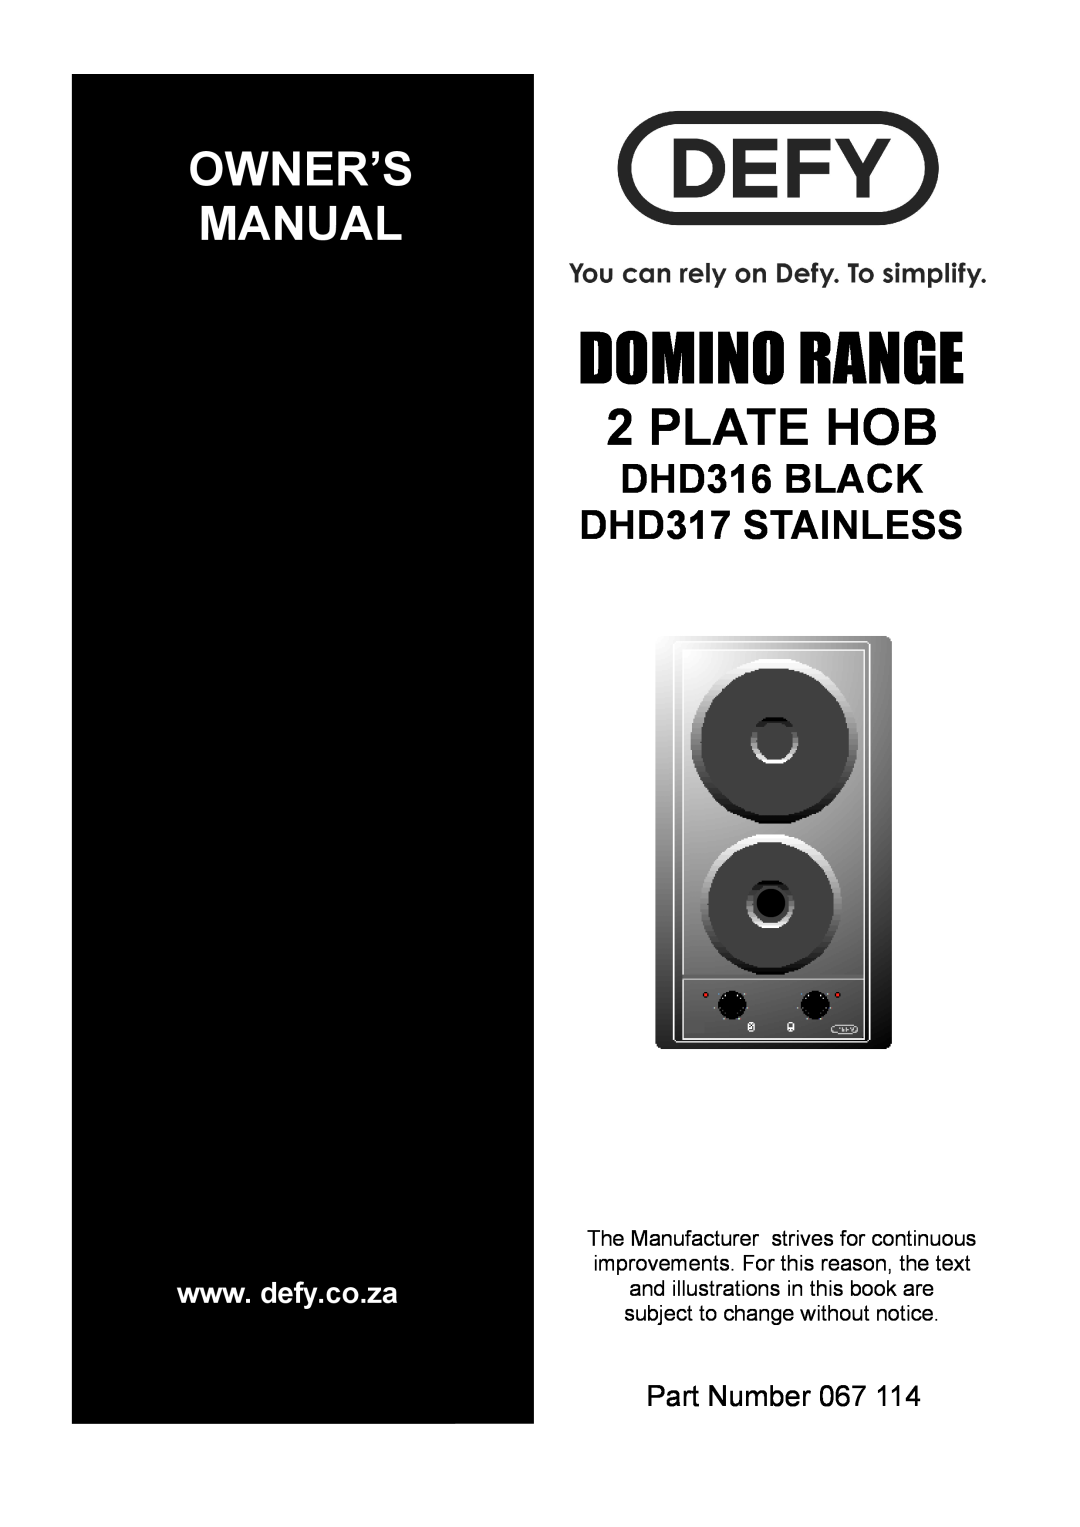 Defy Appliances owner manual Domino Range, Plate Hob, DHD316 BLACK DHD317 STAINLESS, Part Number 